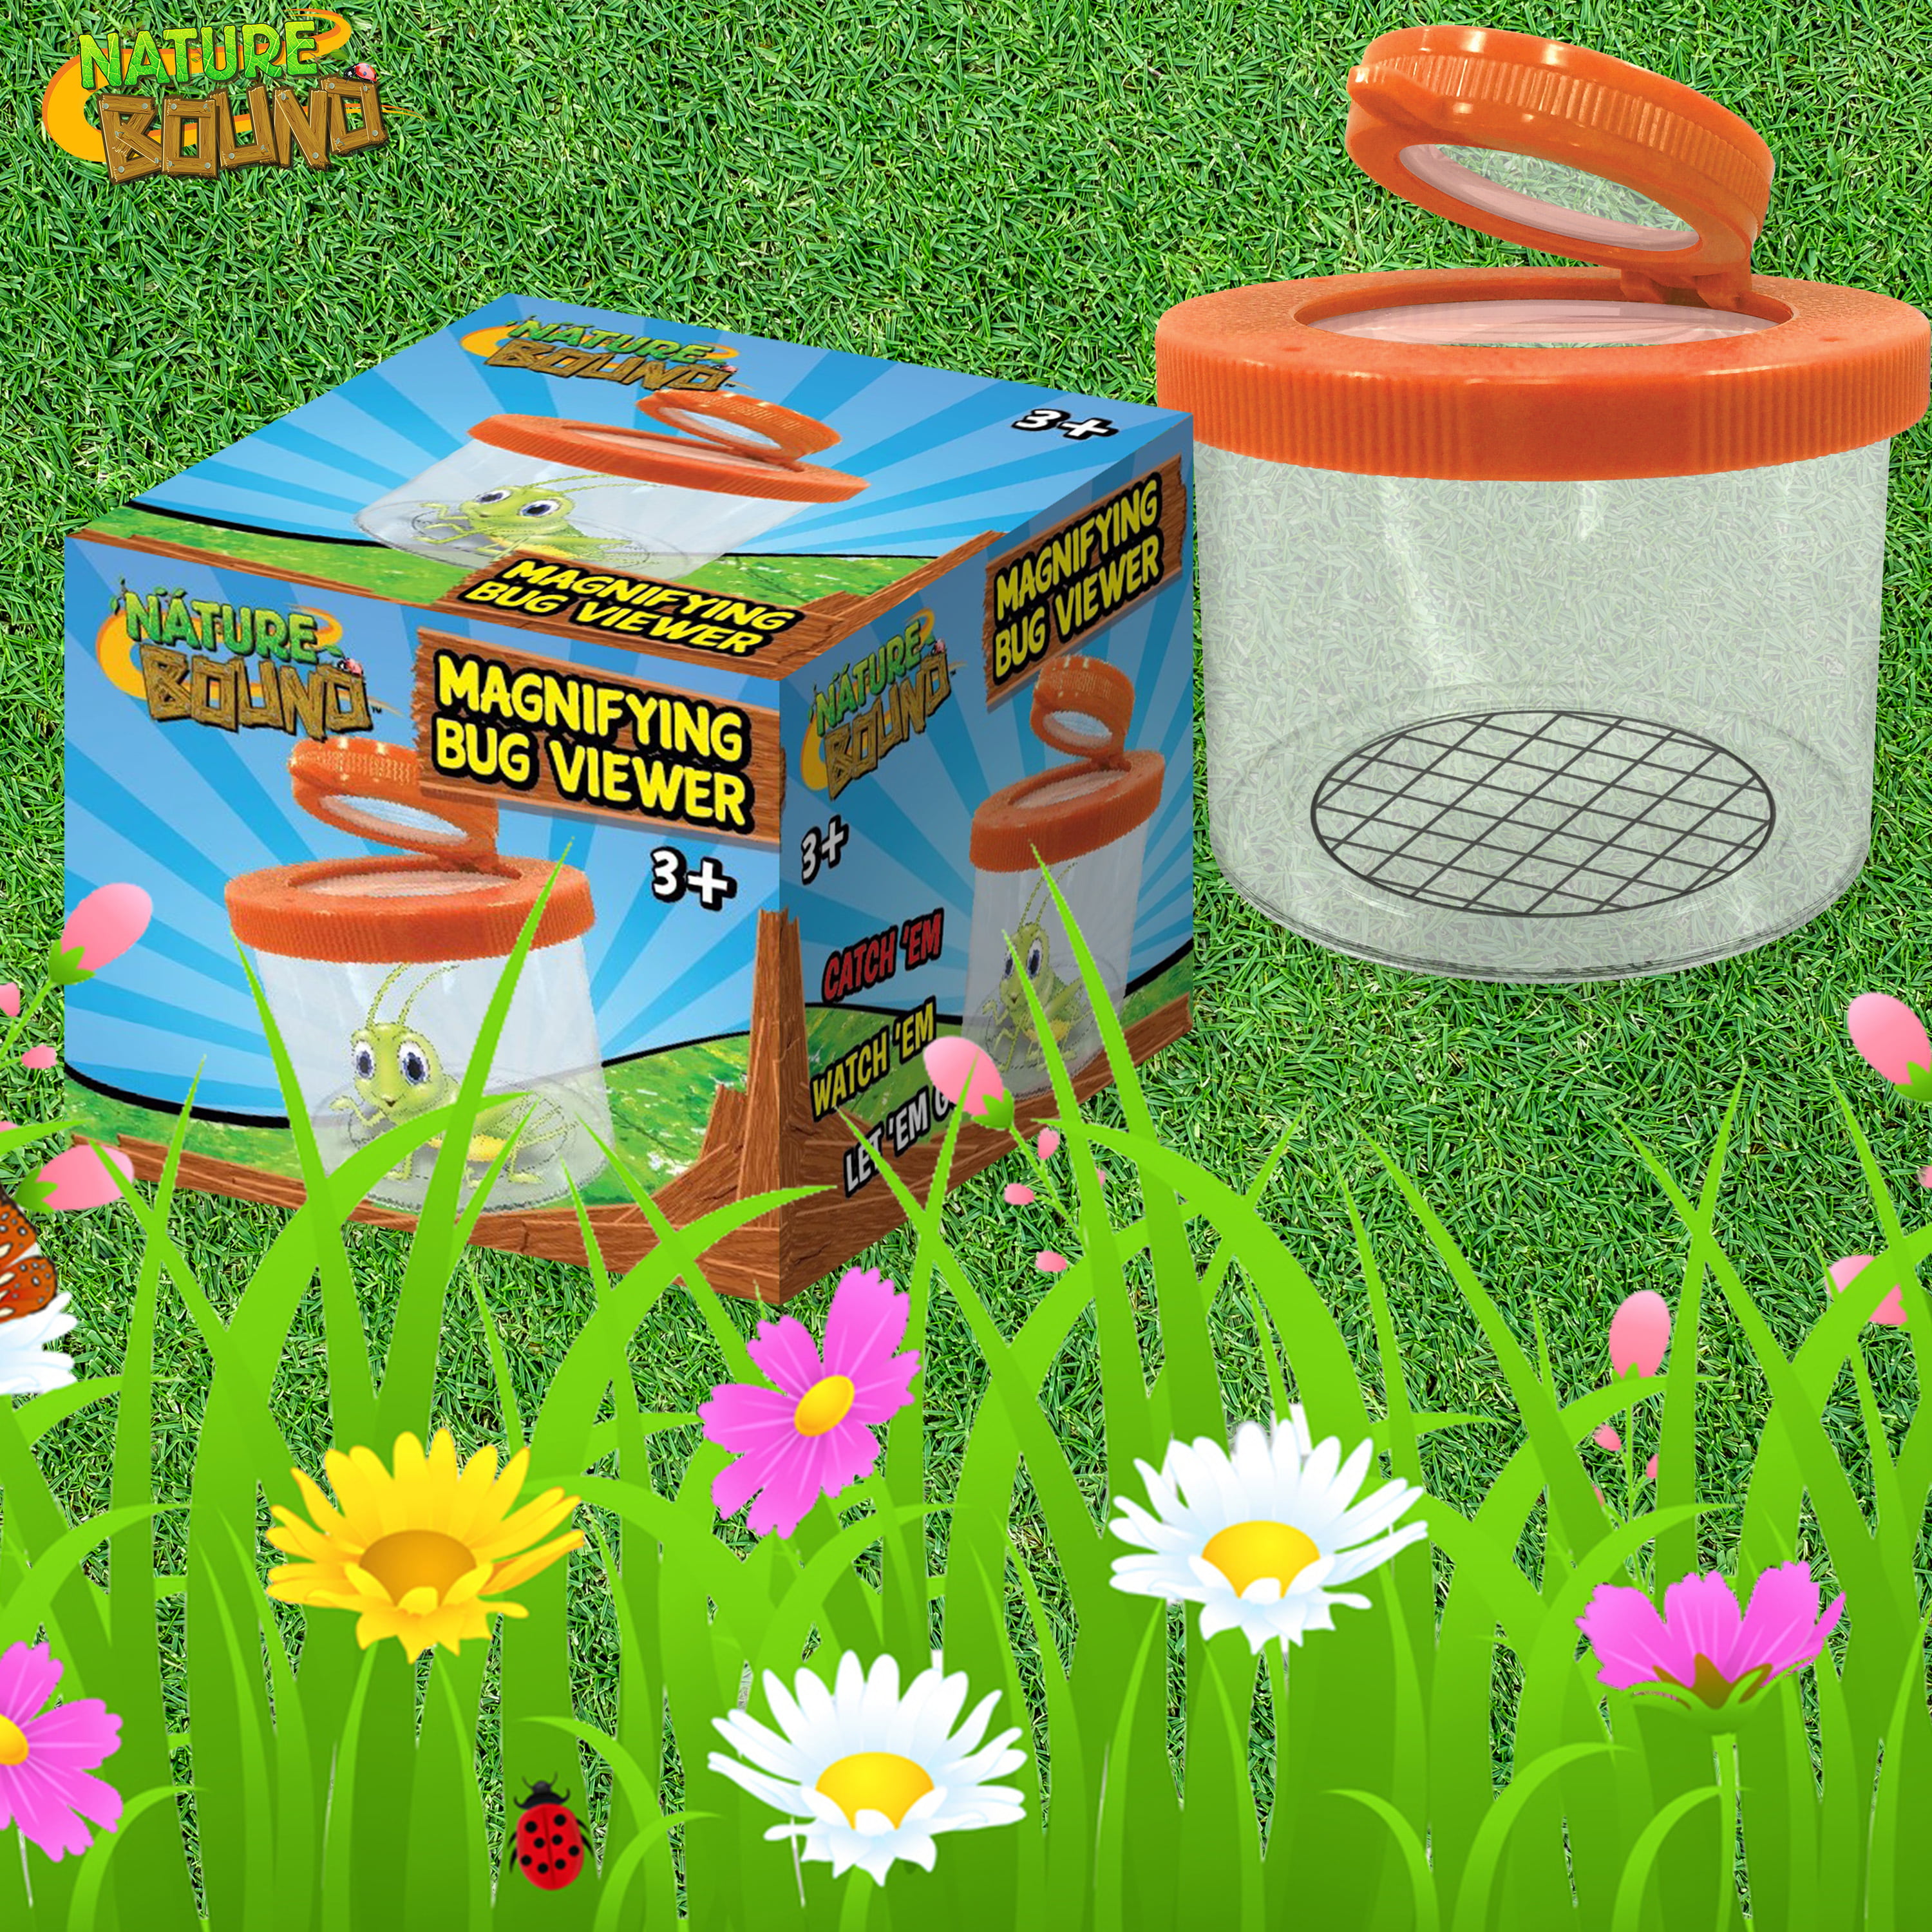 Nobrand Bug Catcher Kit Creative Insect Magnifier Set Bug Collection Viewer For Kids Multicolor